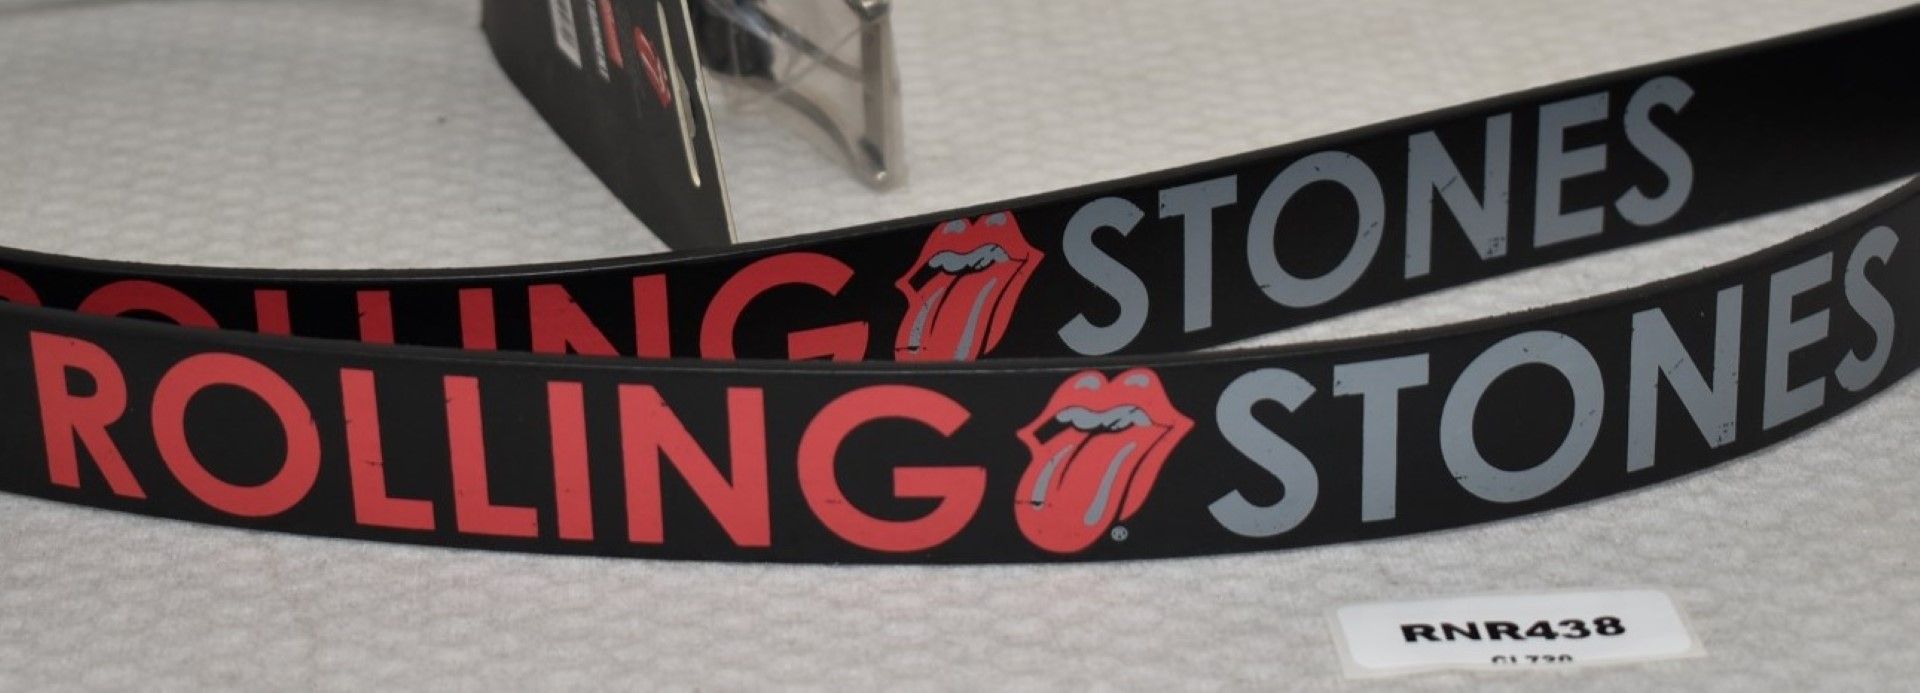 2 x Men's Rolling Stones Belts by Bravado - PU Leather - Iconic Tongue Logo - RRP £40 - Image 3 of 6